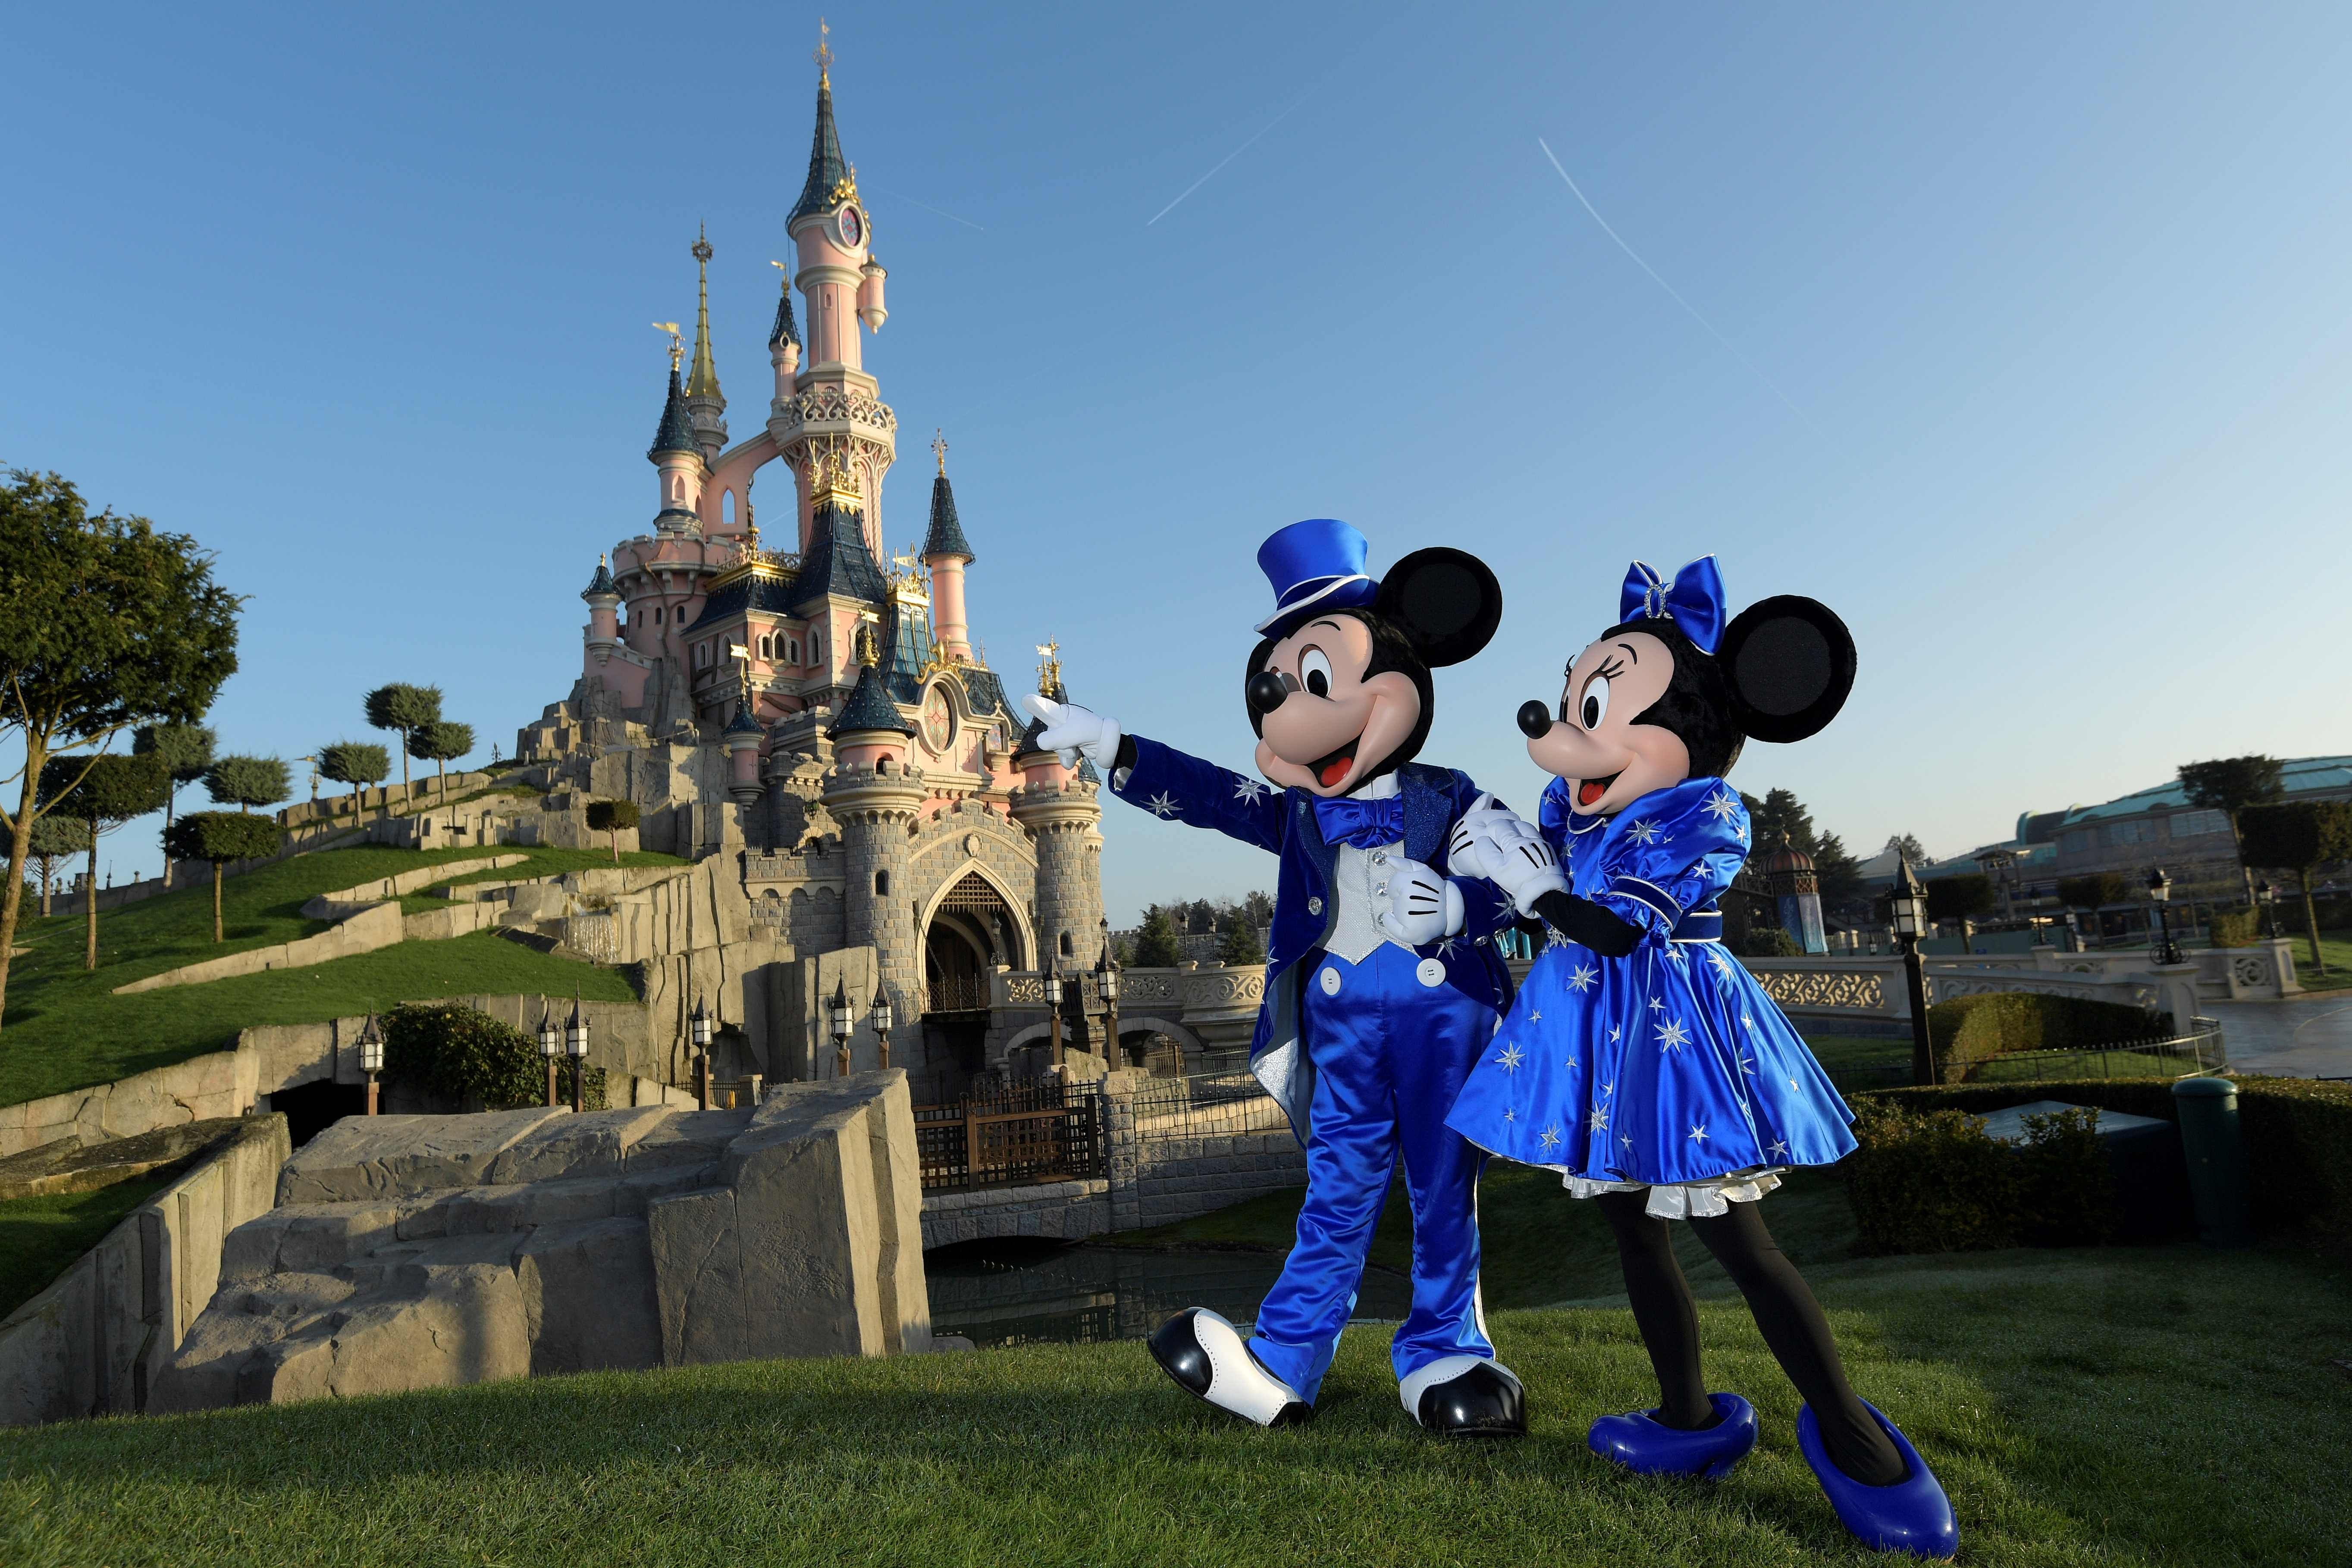  In this file photo Disney characters Mickey and Mini mouse pose on March 16, 2017 in front of the Sleeping Beauty Castle to mark the 25th anniversary of Disneyland. (Credit: AFP)